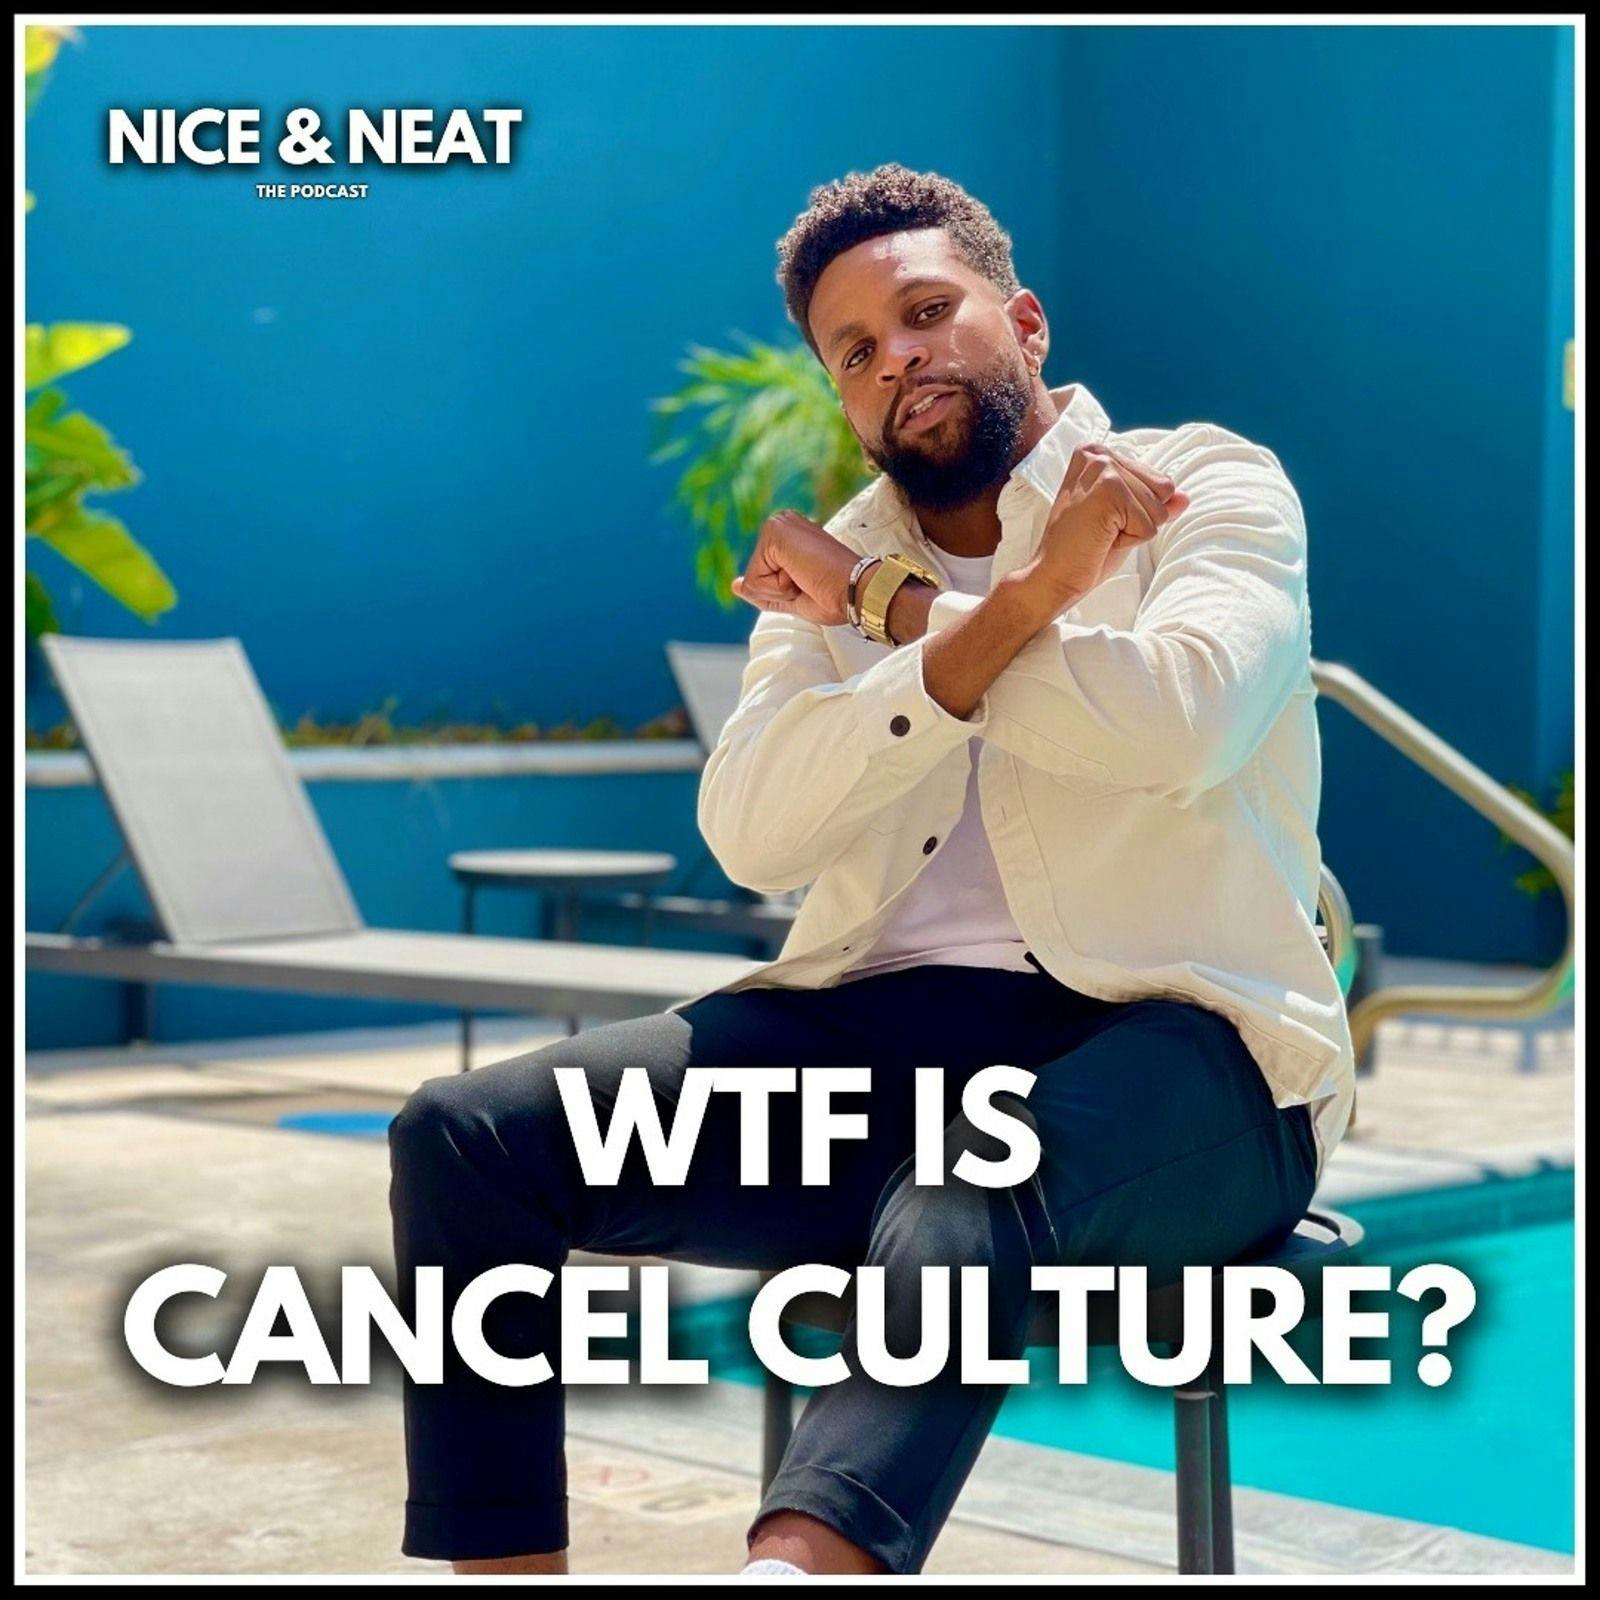 WTF IS CANCEL CULTURE!? (EP11,S2)